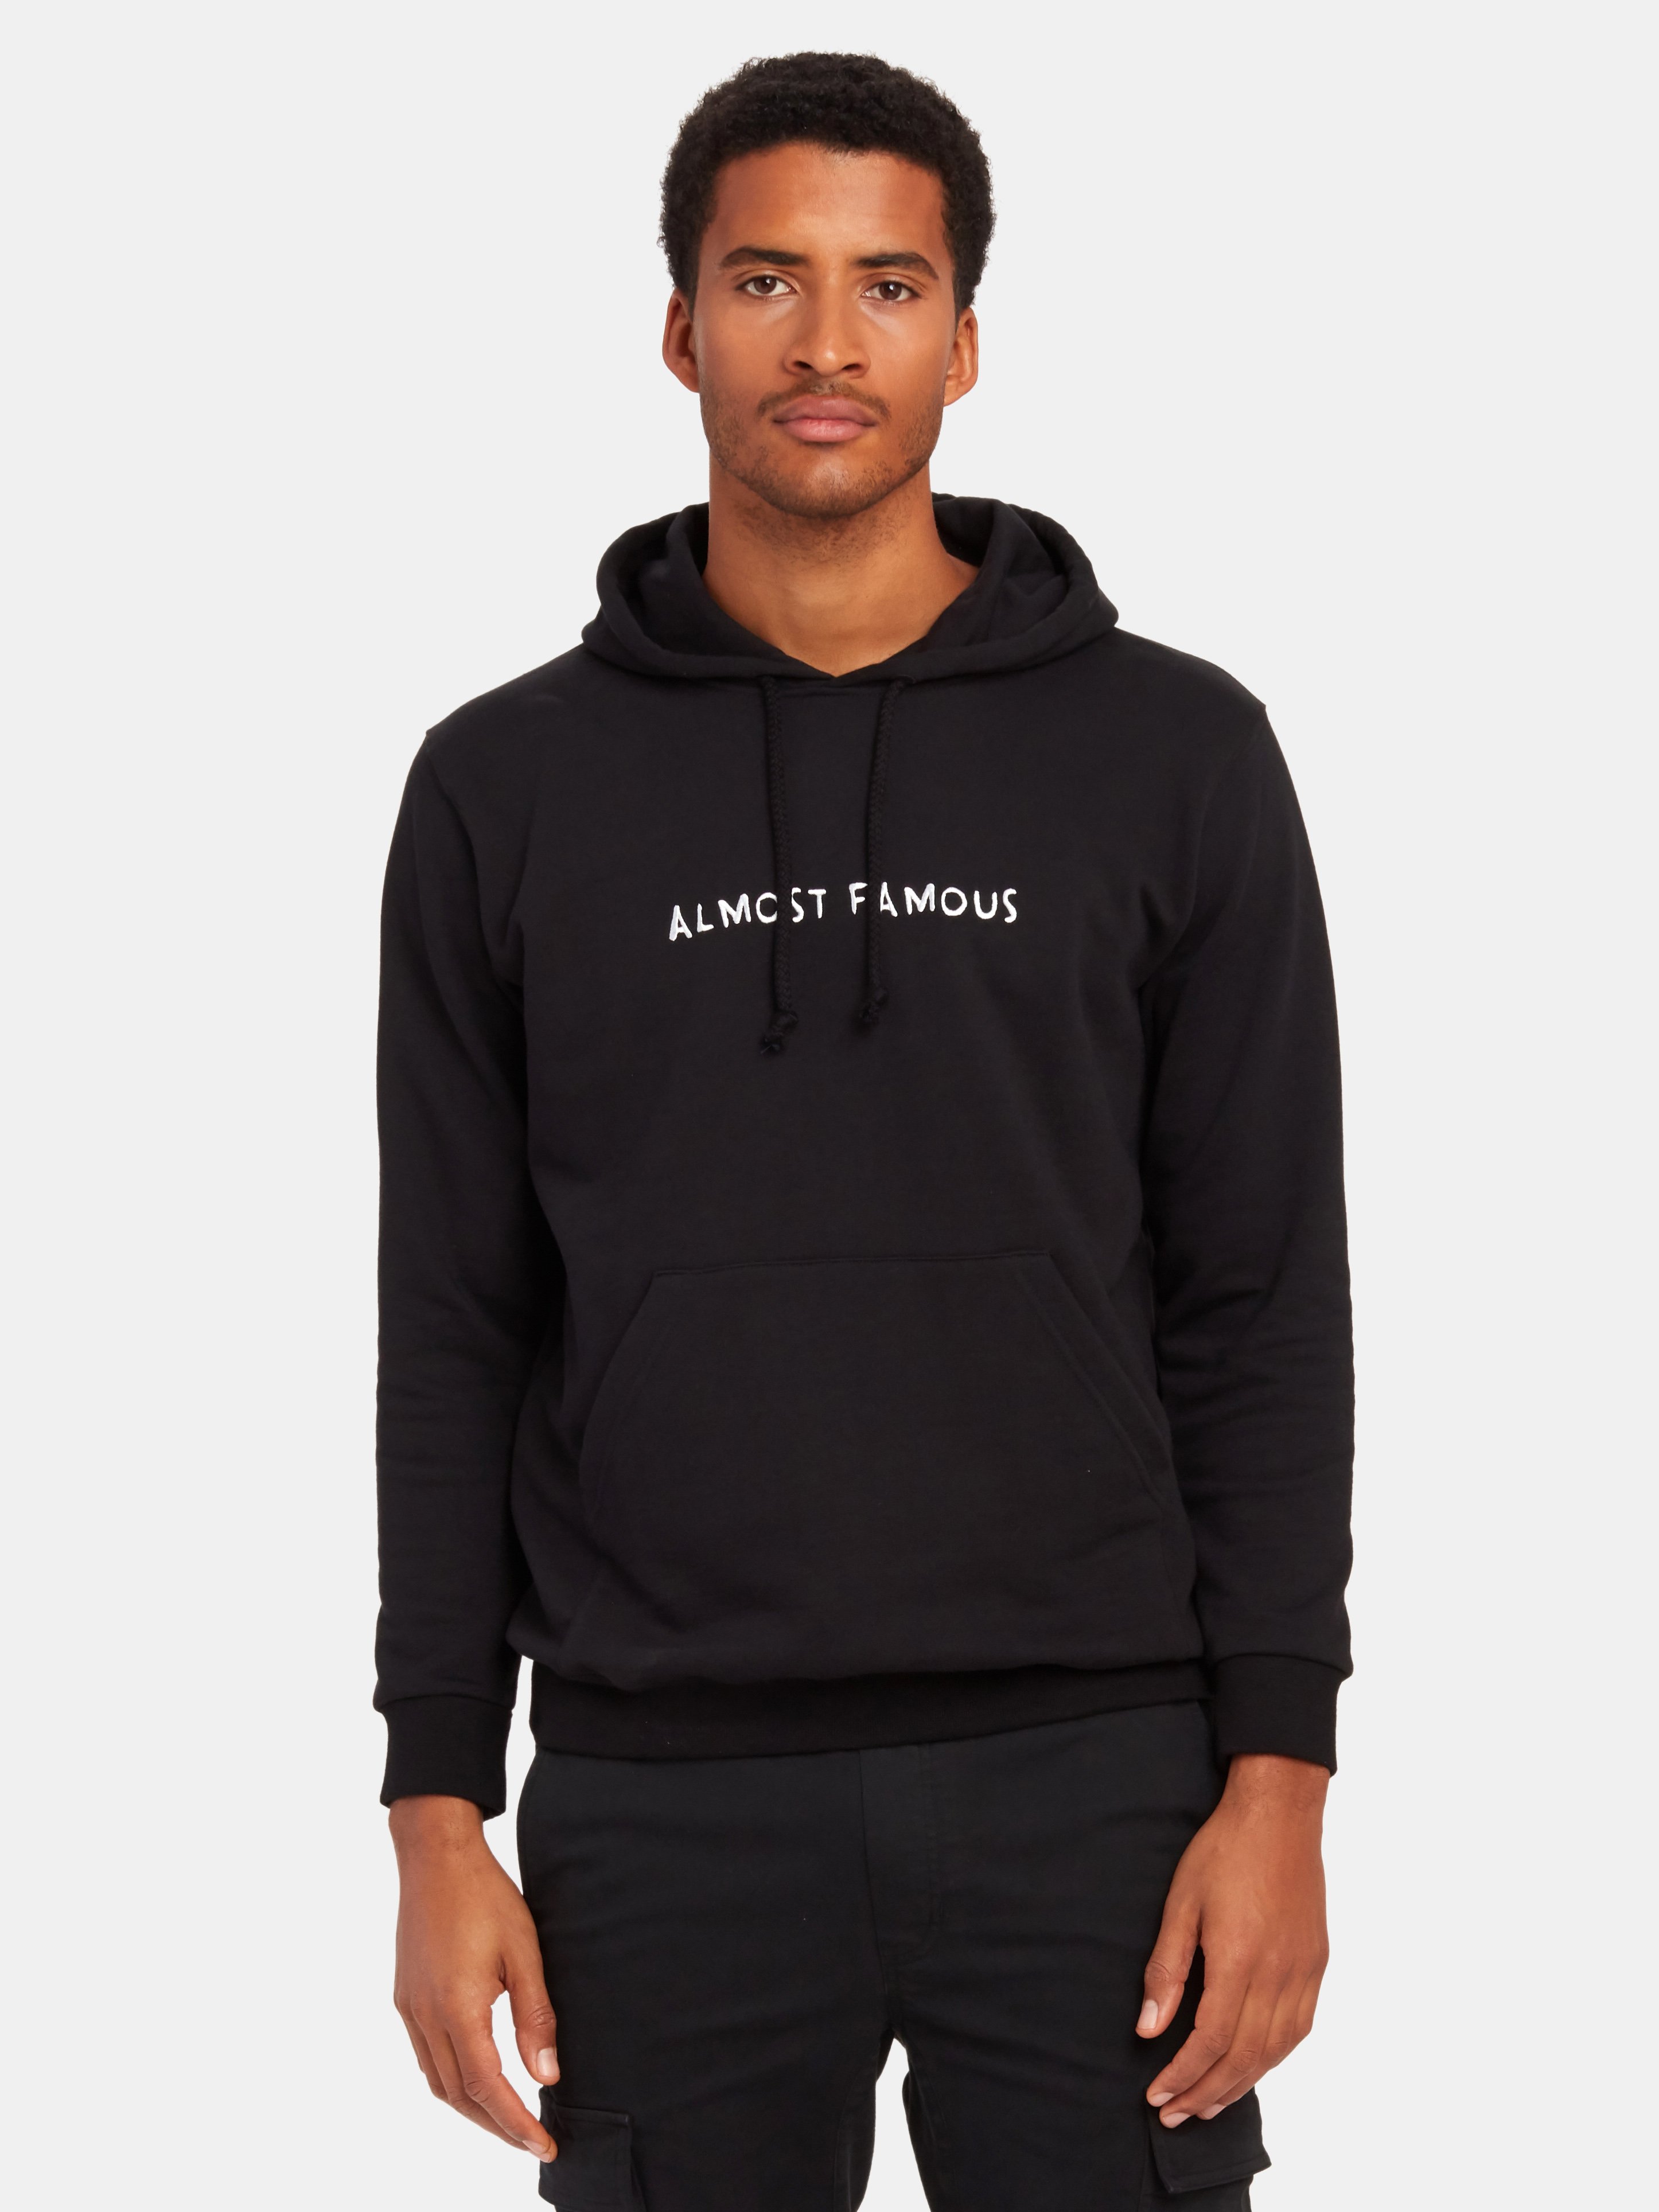 almost famous hoodie